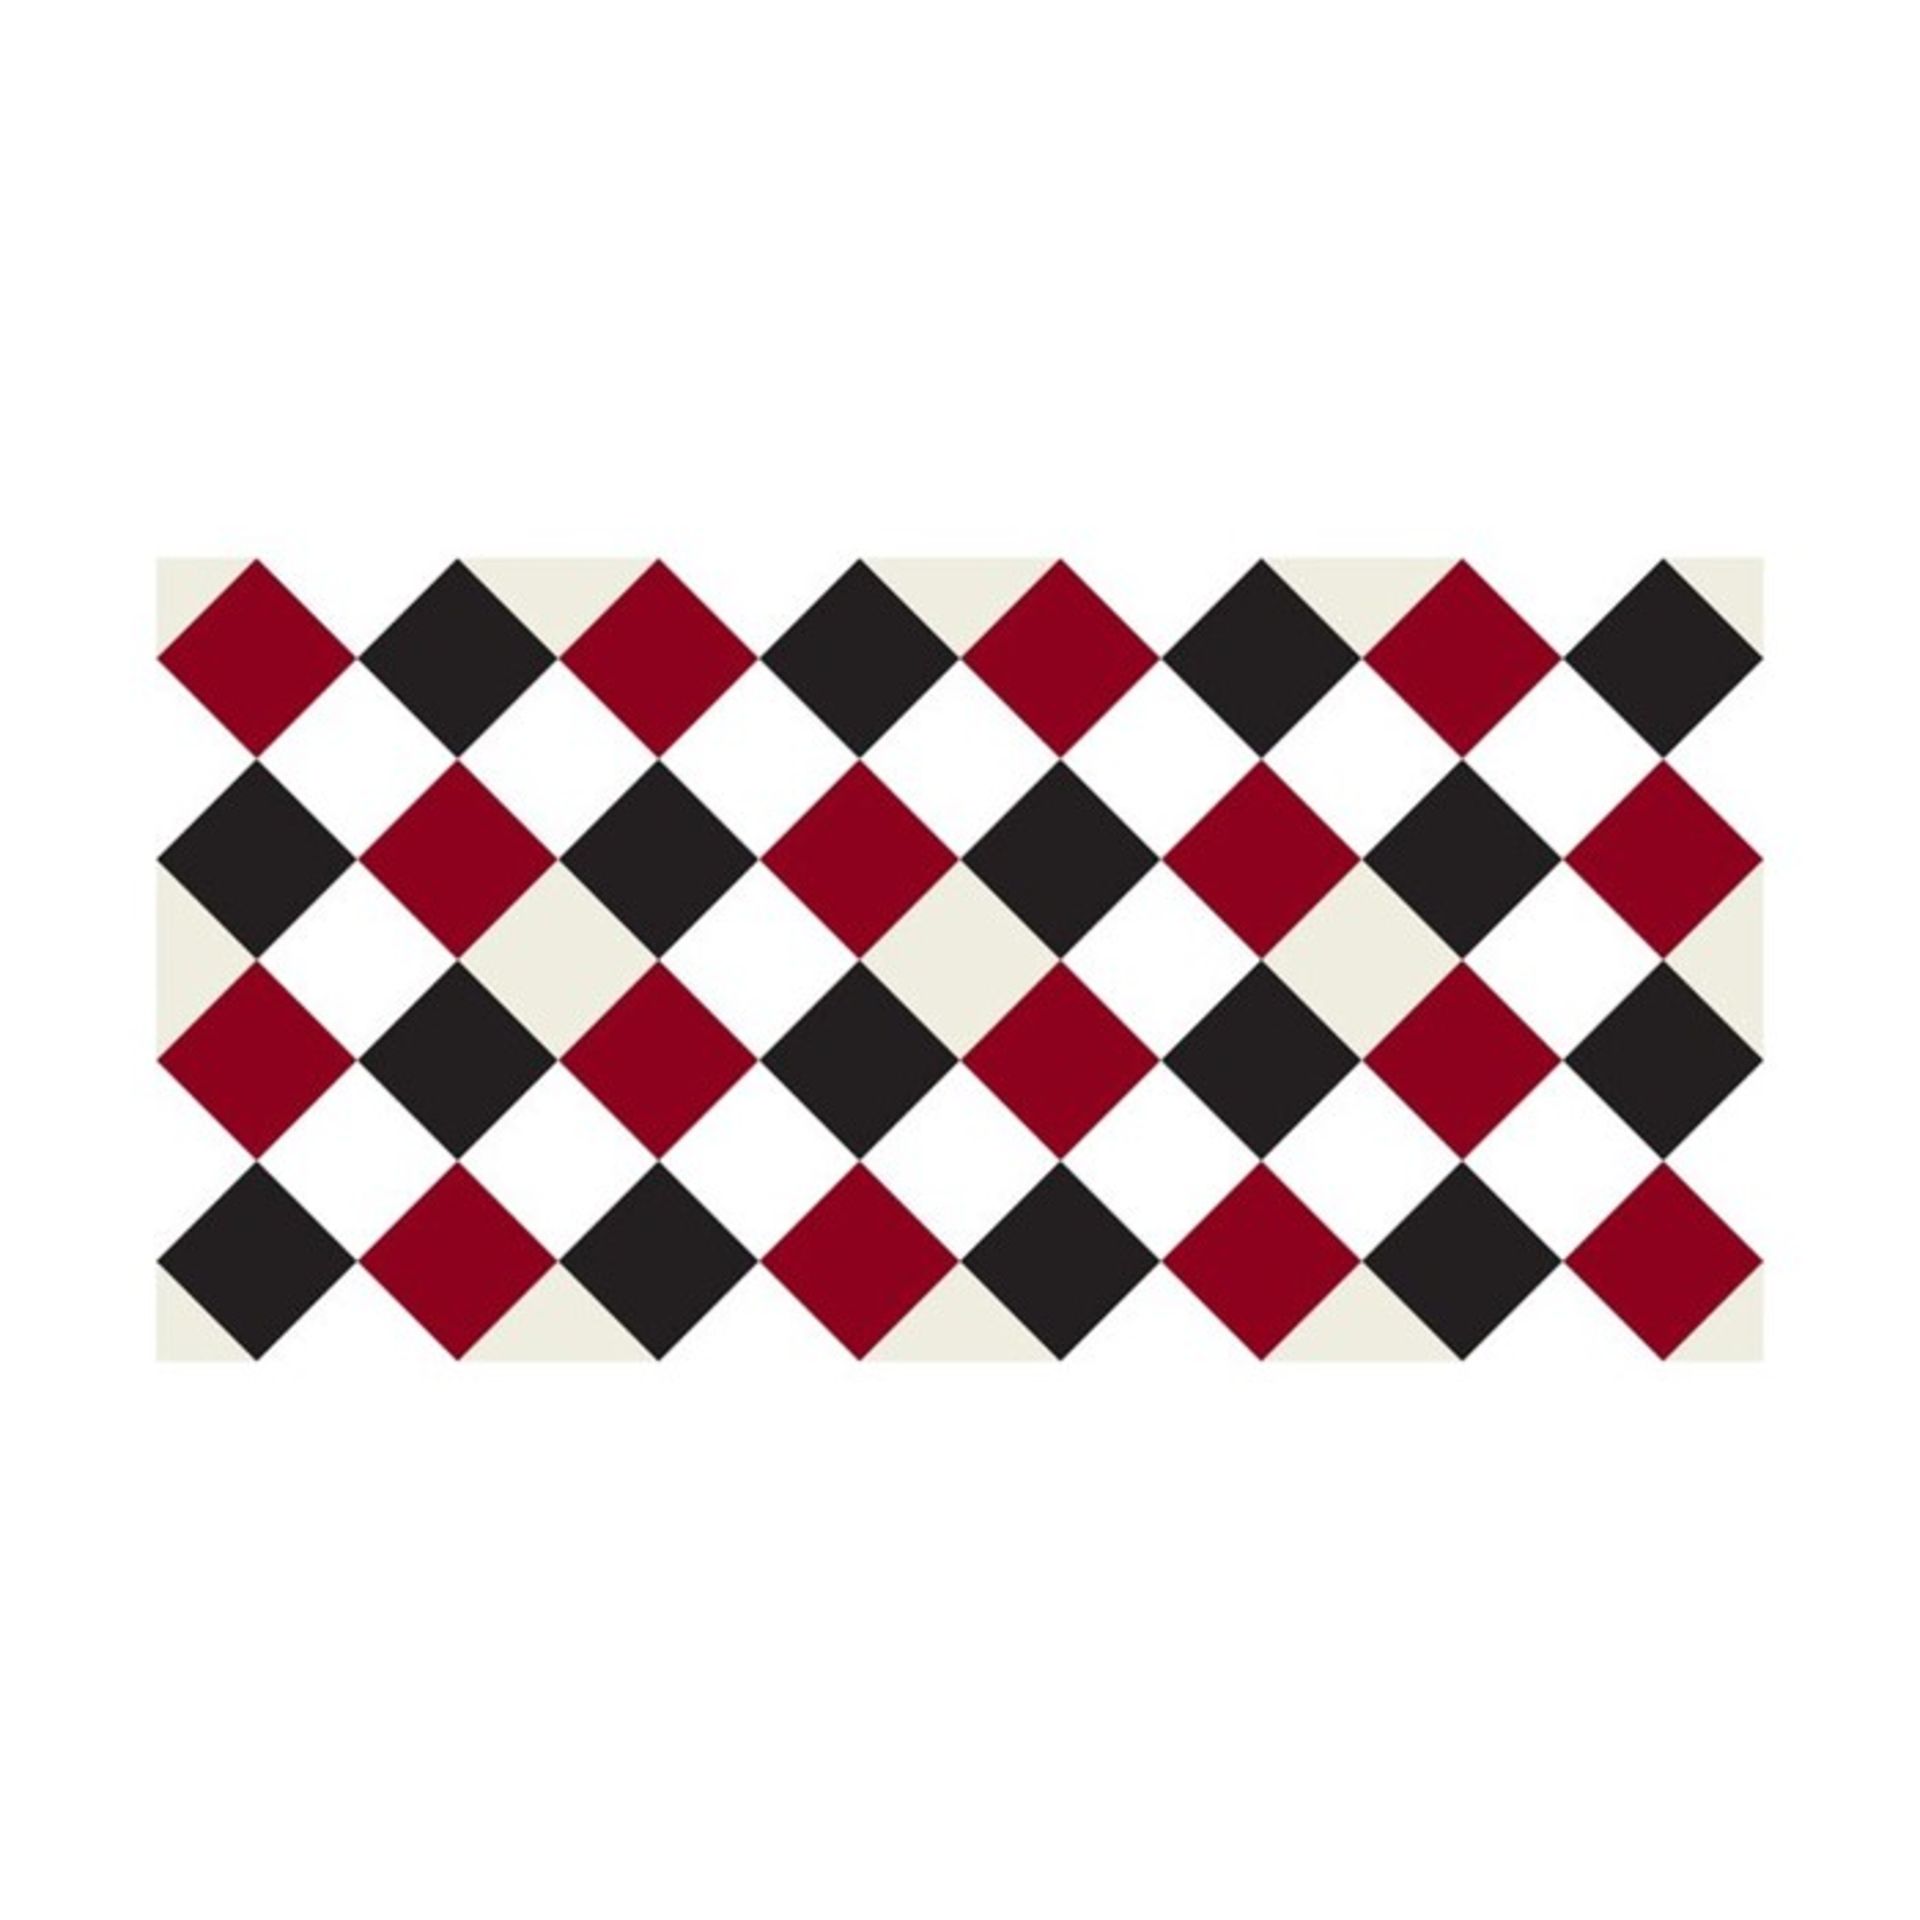 17 Stories 130 x 60 cm PVC Patterned Tile in Red/Black X11 (XDNL1245 - 15961/1 - 15961/8 - 15961/9 -